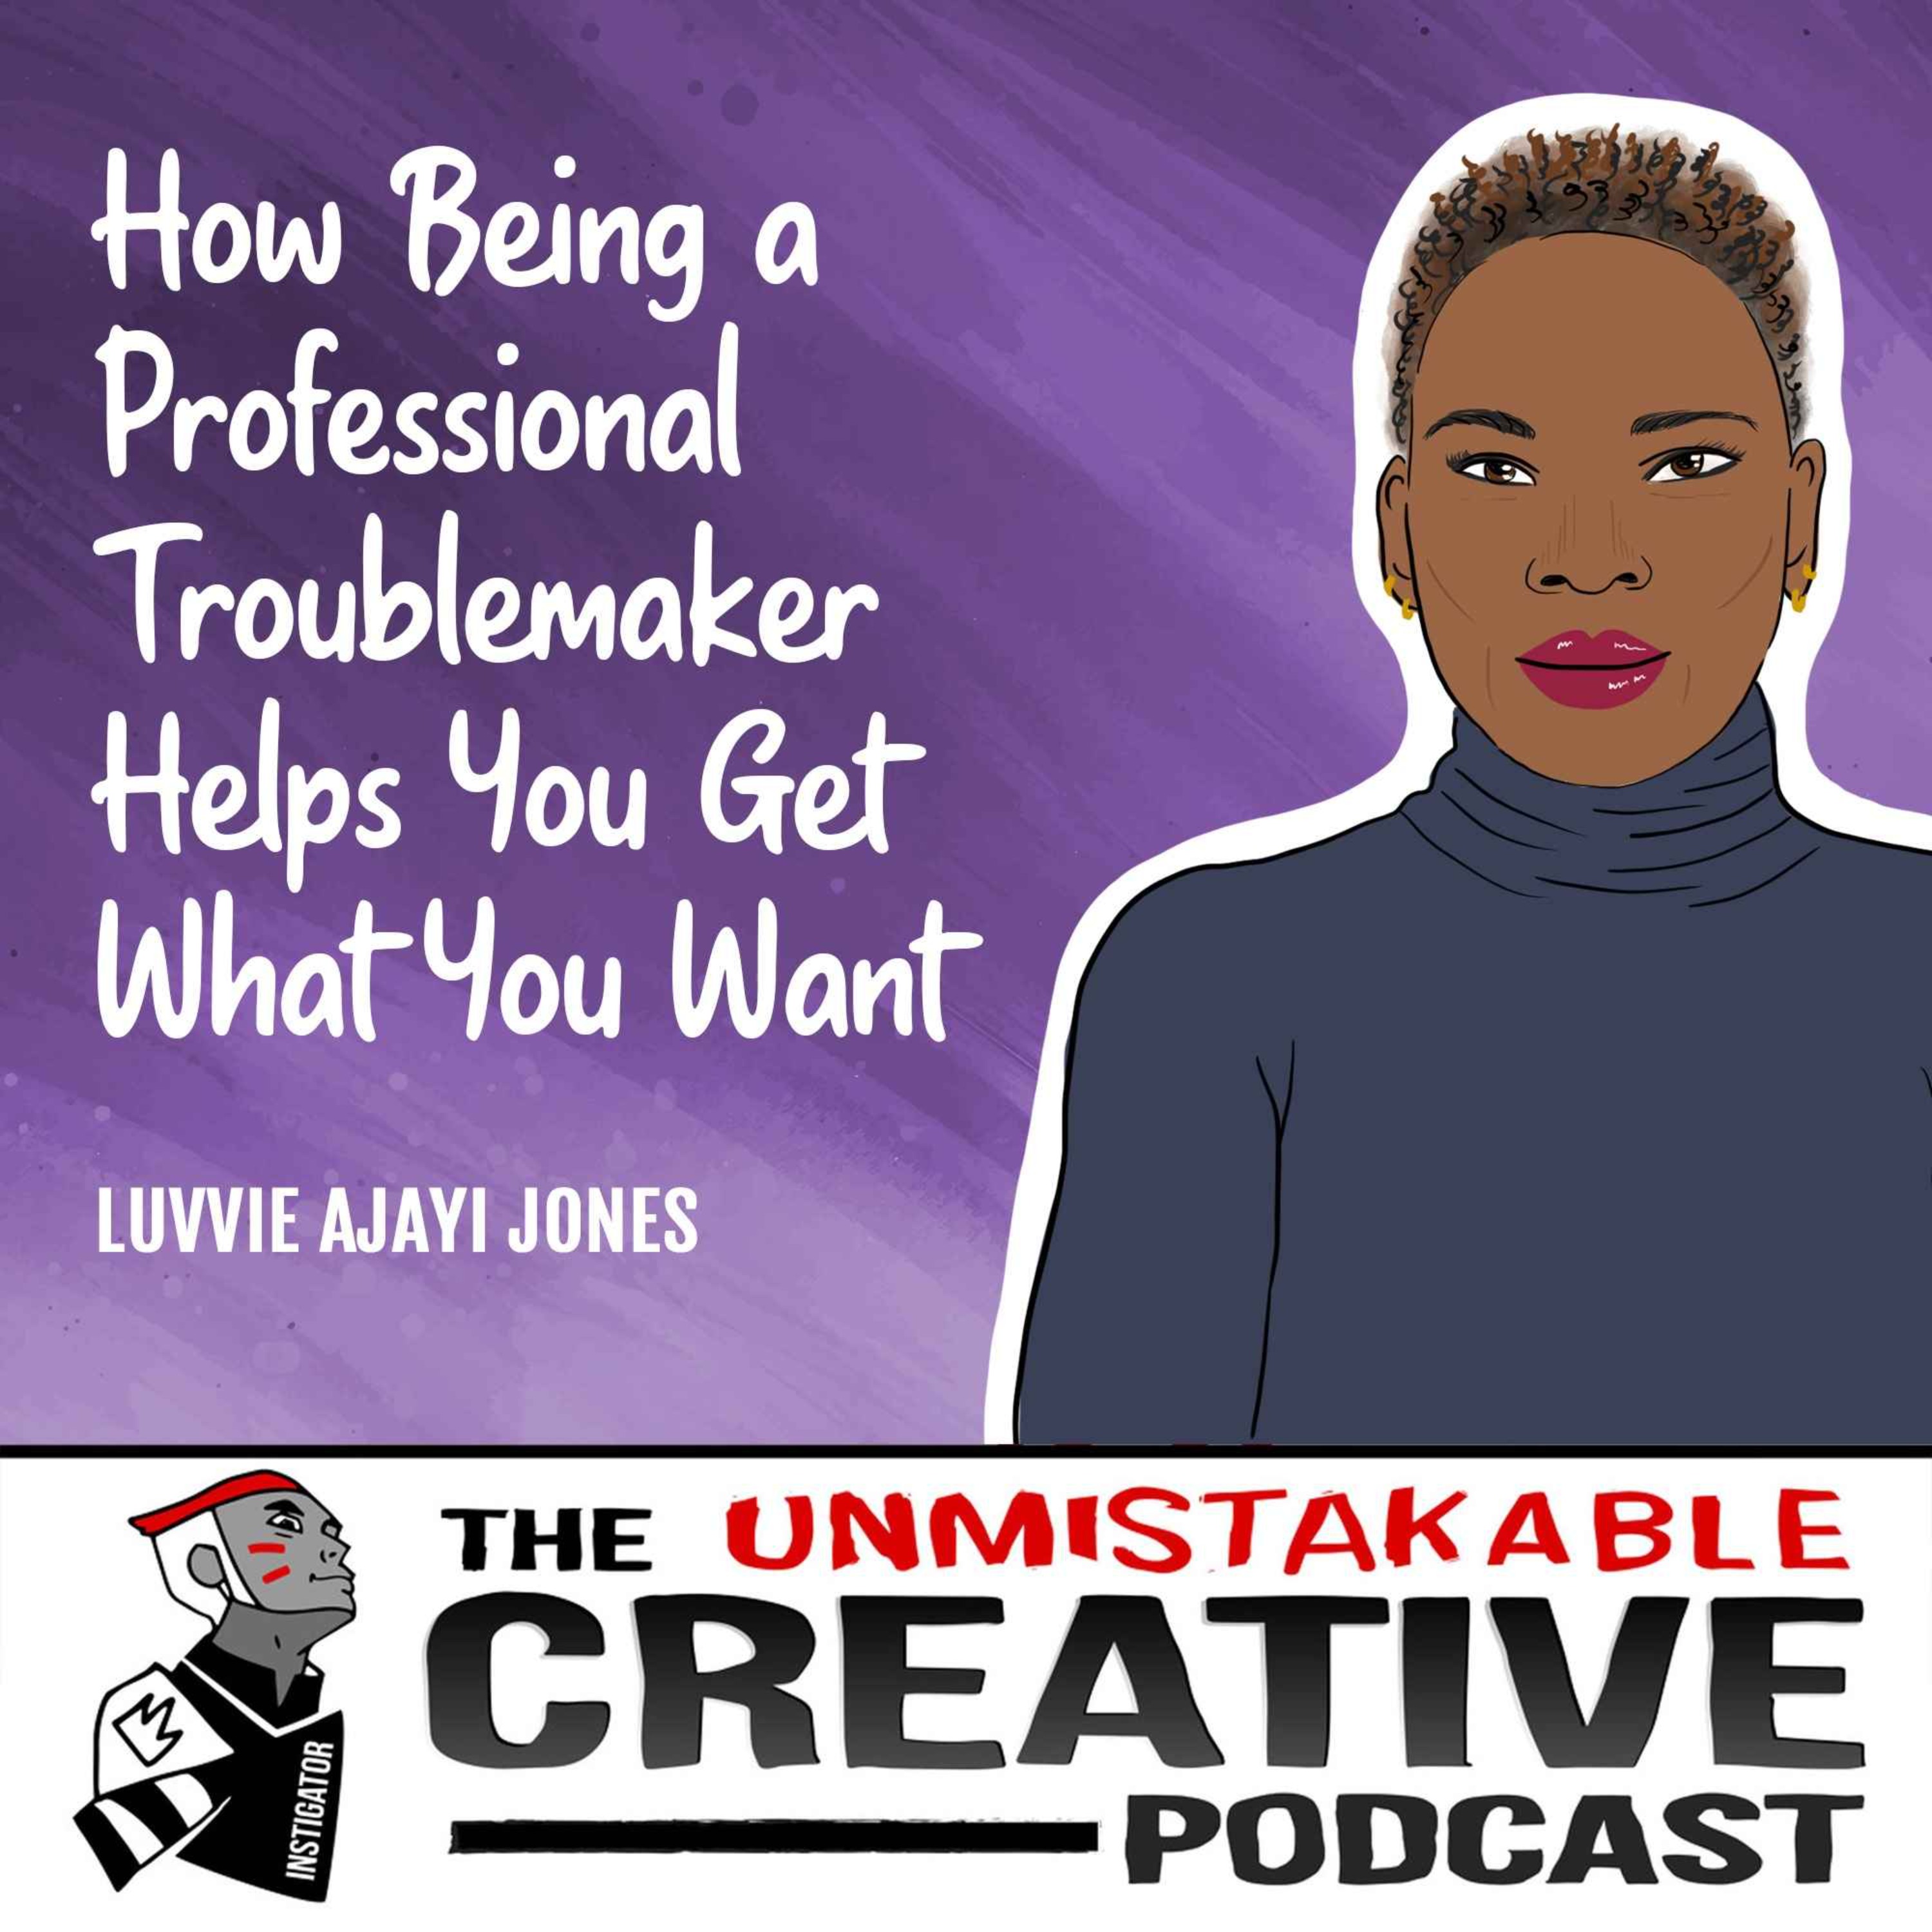 Luvvie Ajayi Jones | How Being a Professional Troublemaker Helps You Get What You Want Image